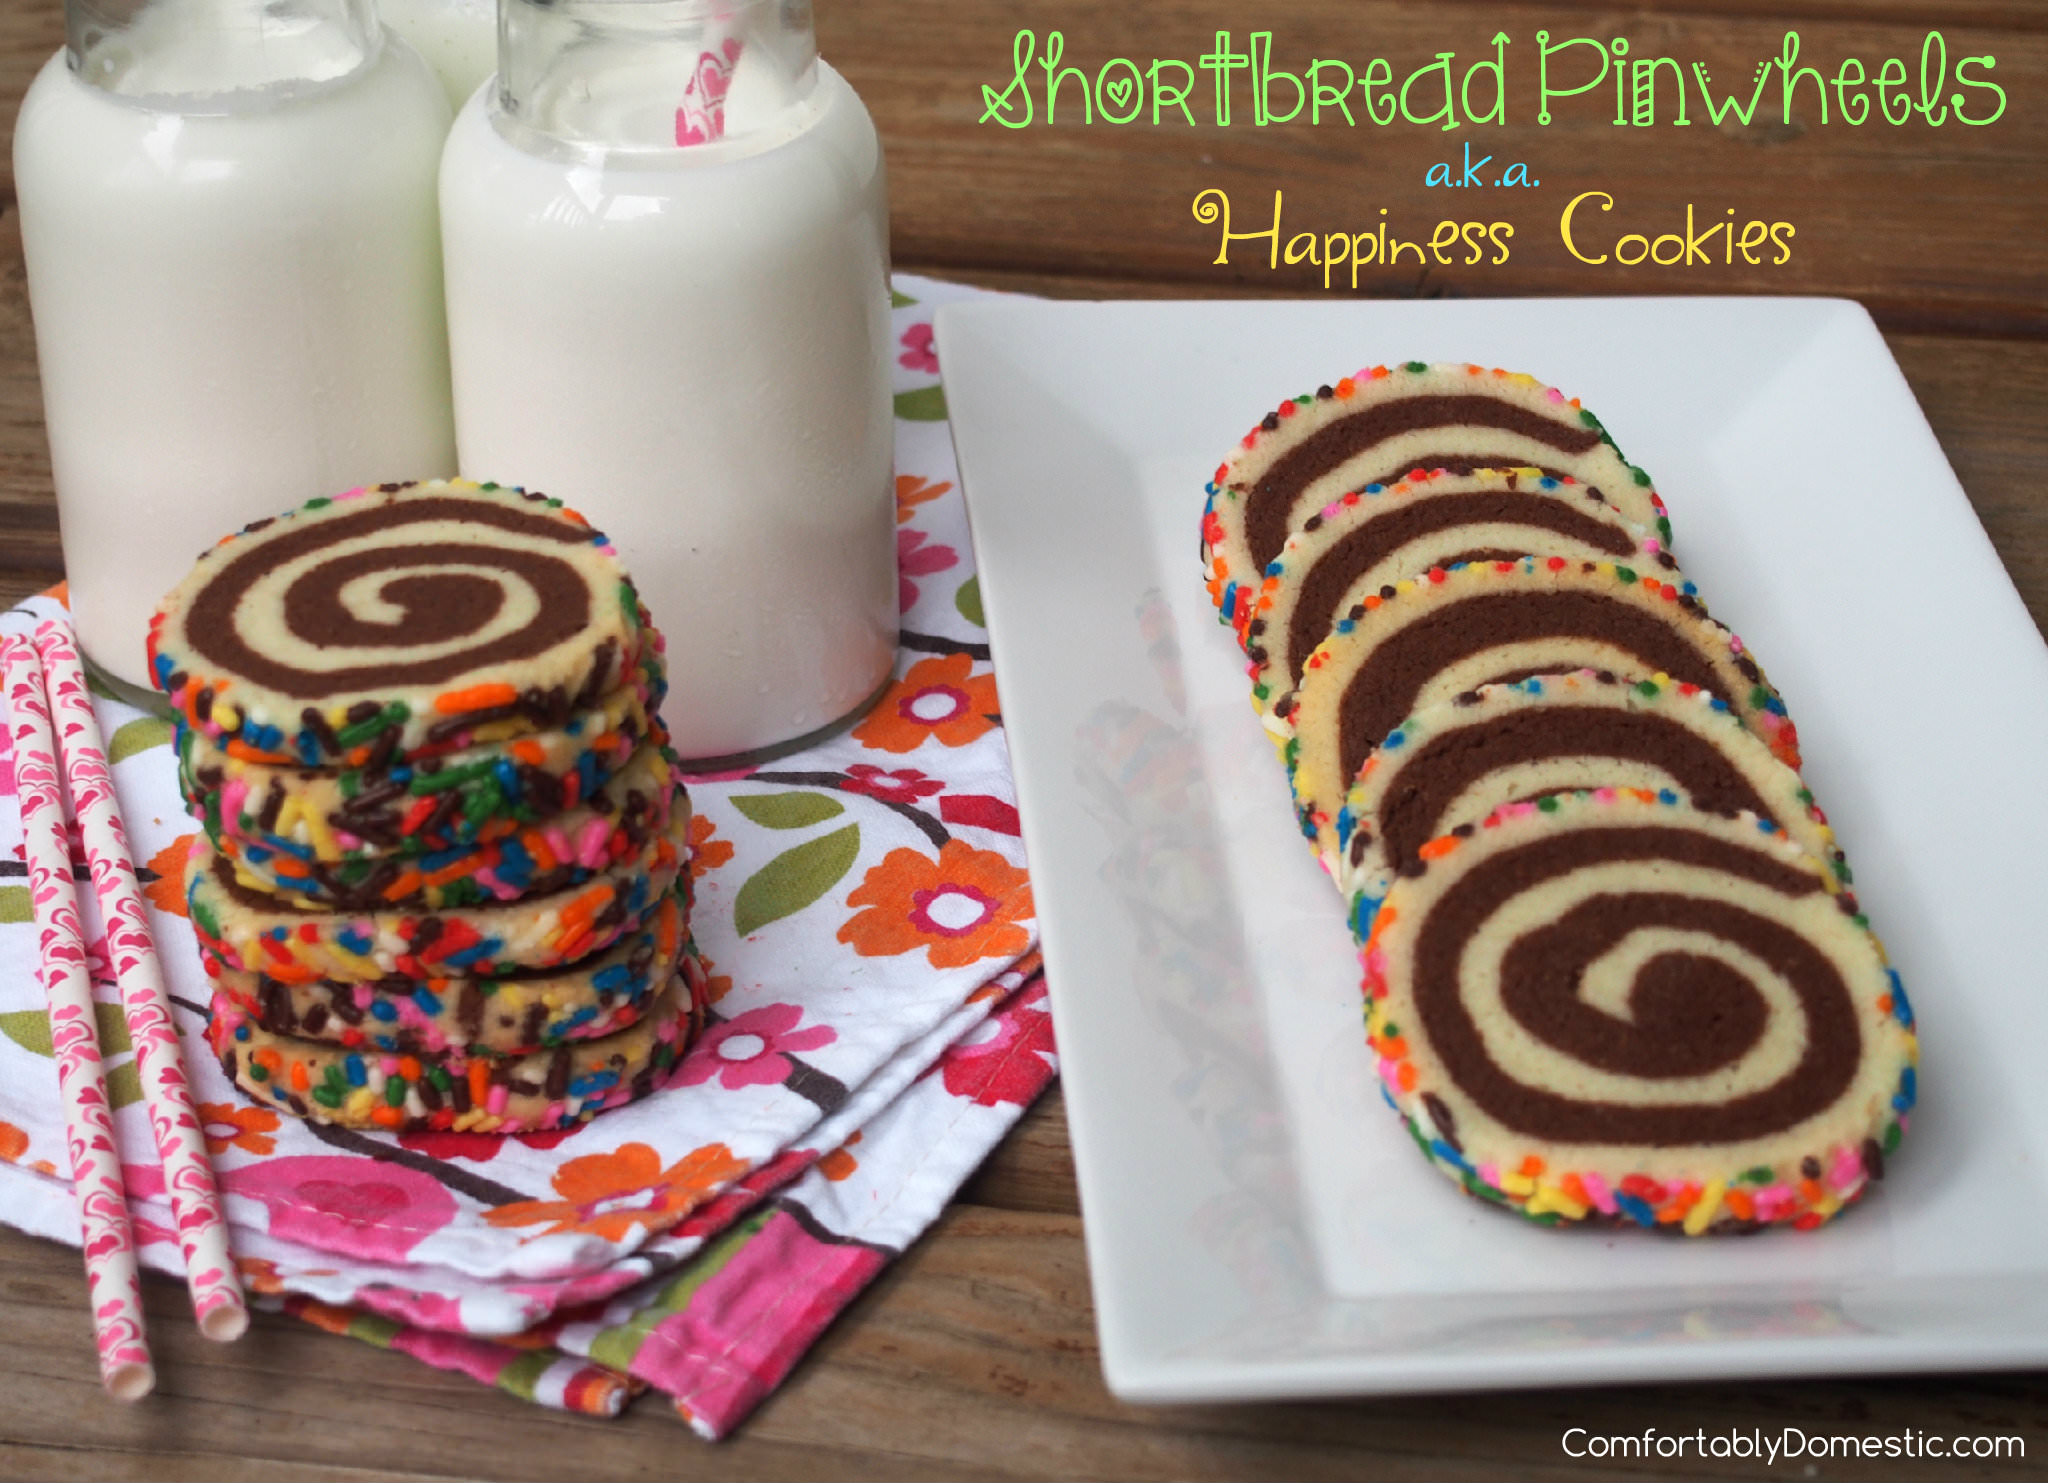 Shortbread pinwheels are buttery vanilla and chocolate shortbread cookies presented in a fun pinwheel design, with colorful sprinkles for an added touch of whimsy. | ComfortablyDomestic.com, a.k.a. Happiness Cookies